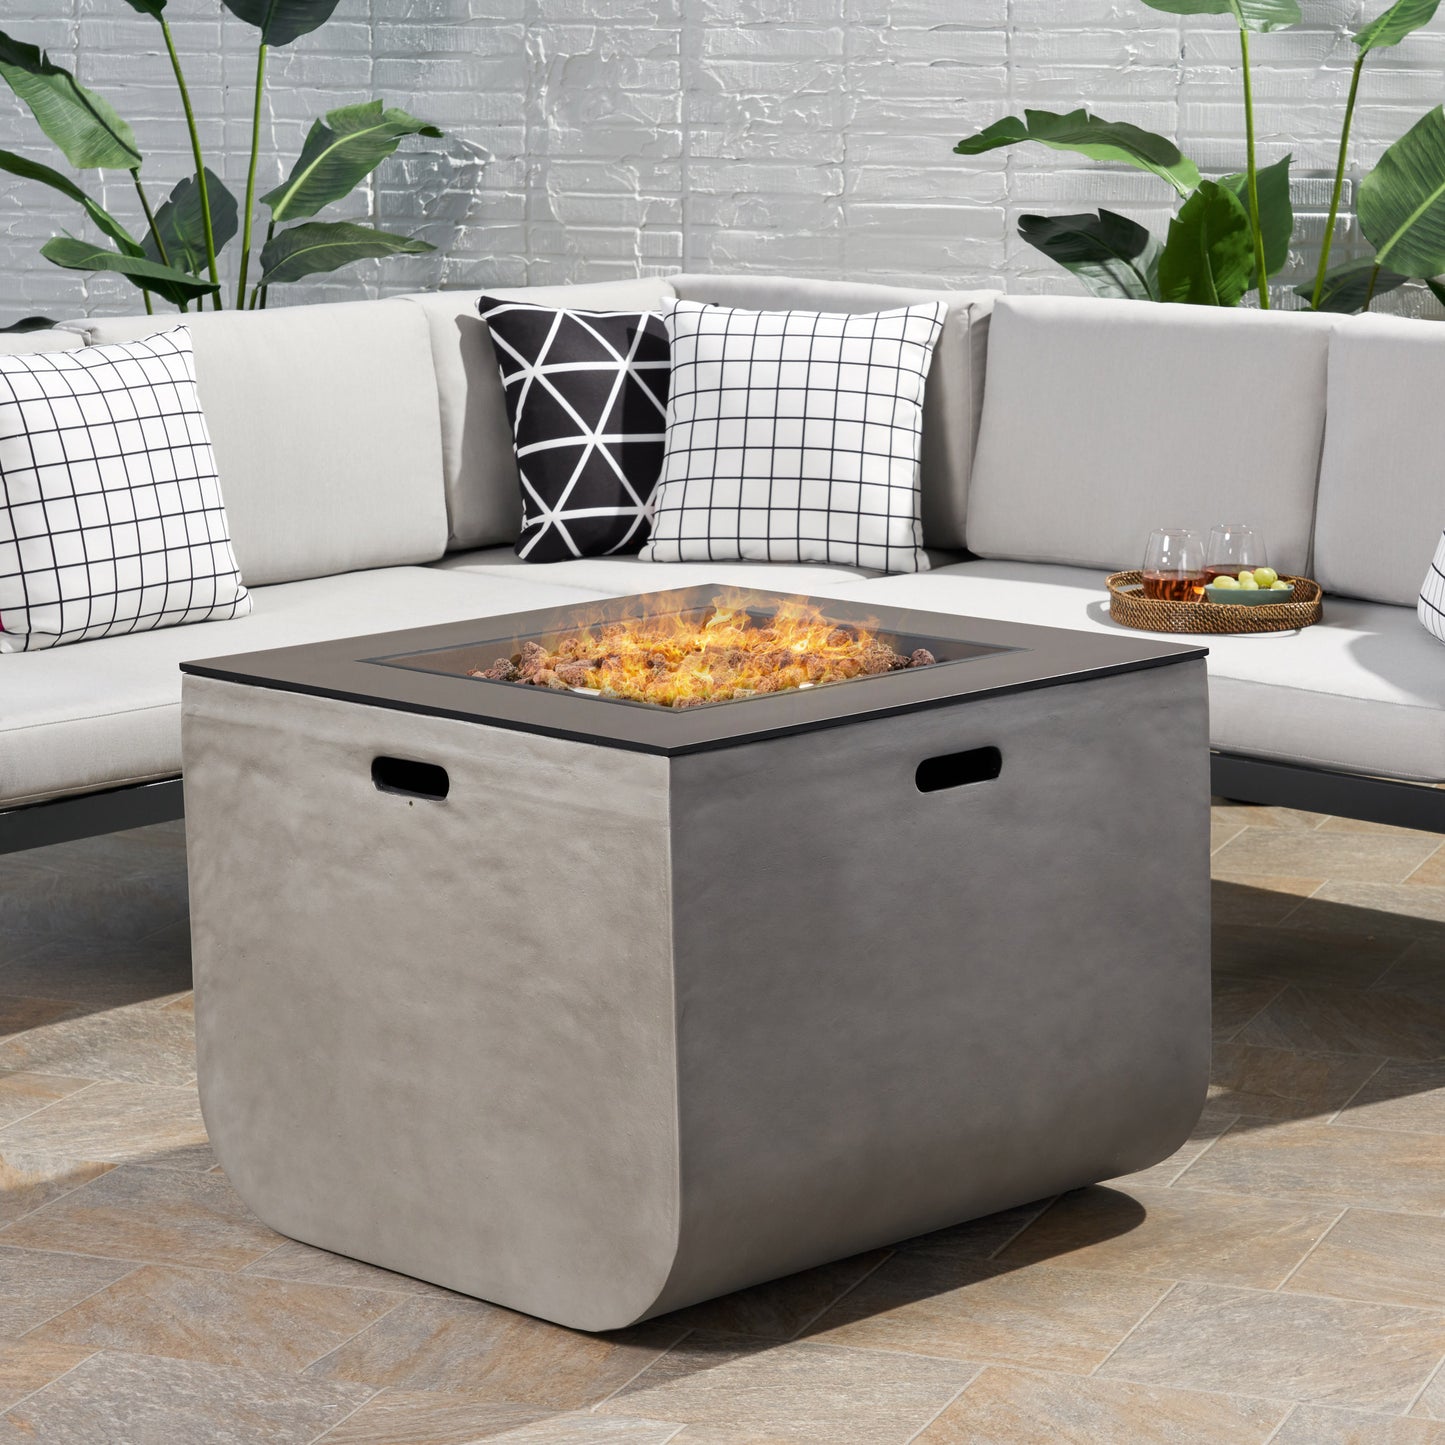 Laini Outdoor Modern 30-Inch Square Fire Pit